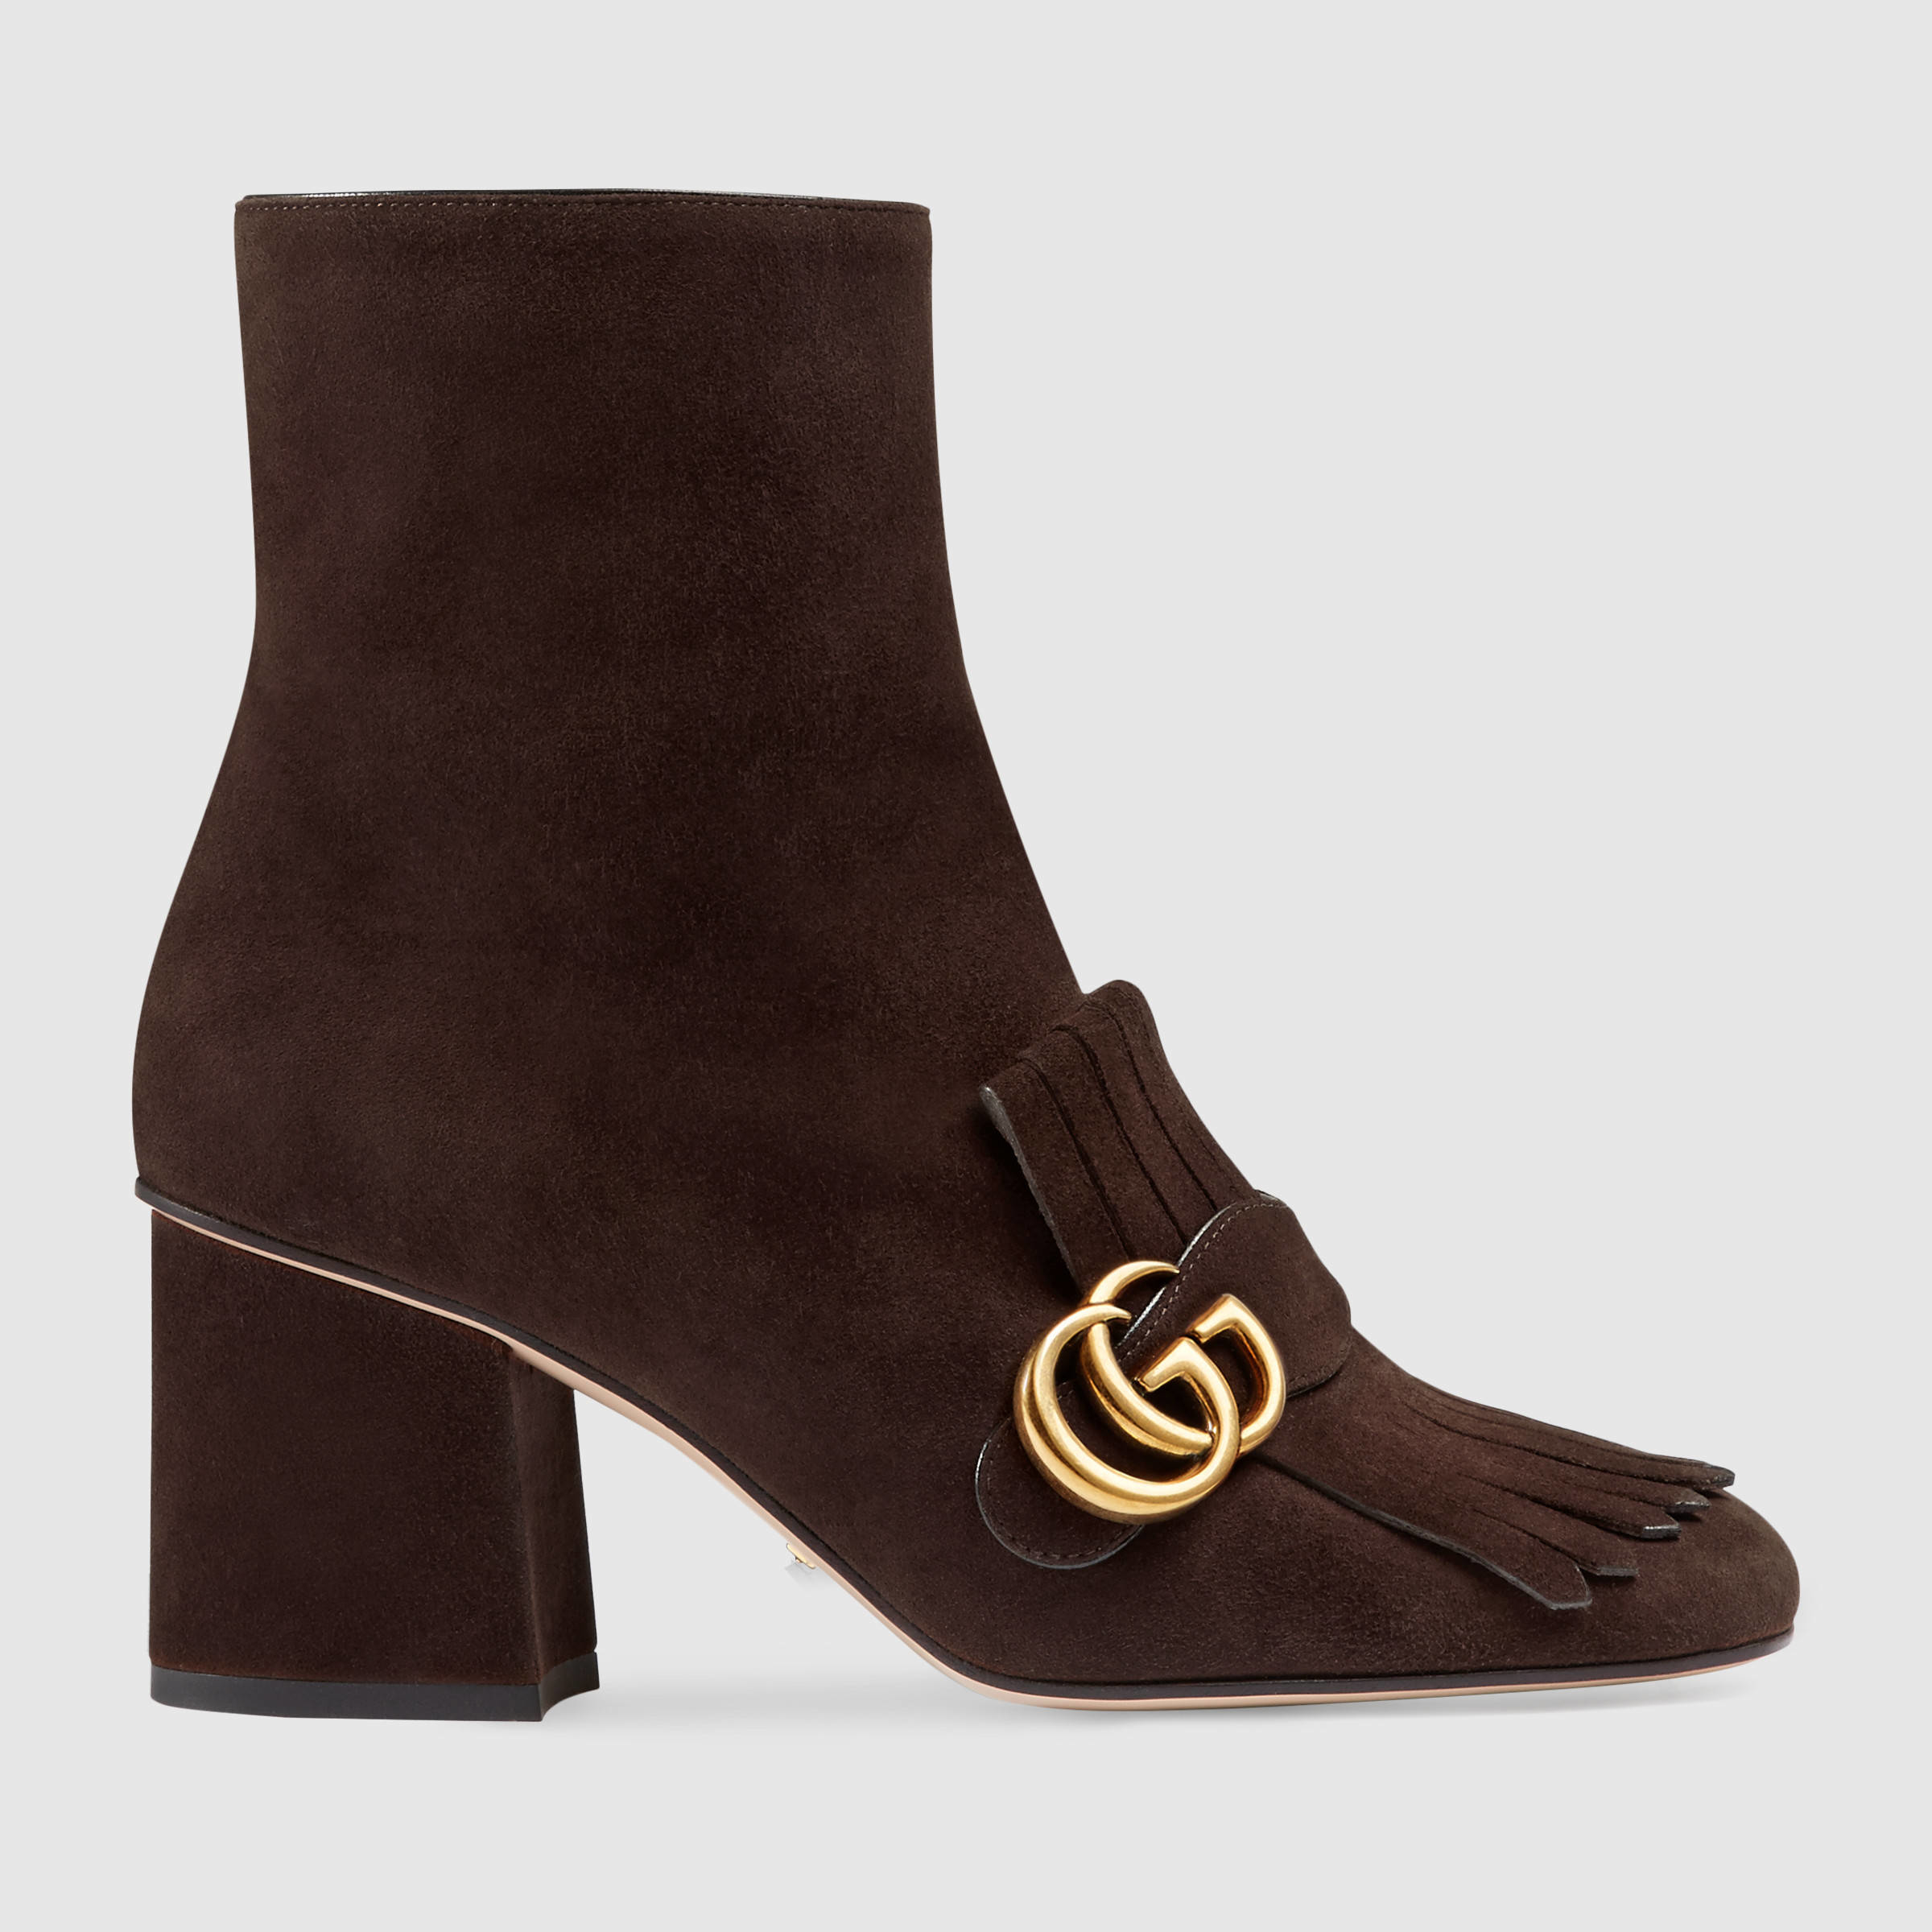 Gucci Marmont GG Suede Ankle Boots in Brown | Lyst